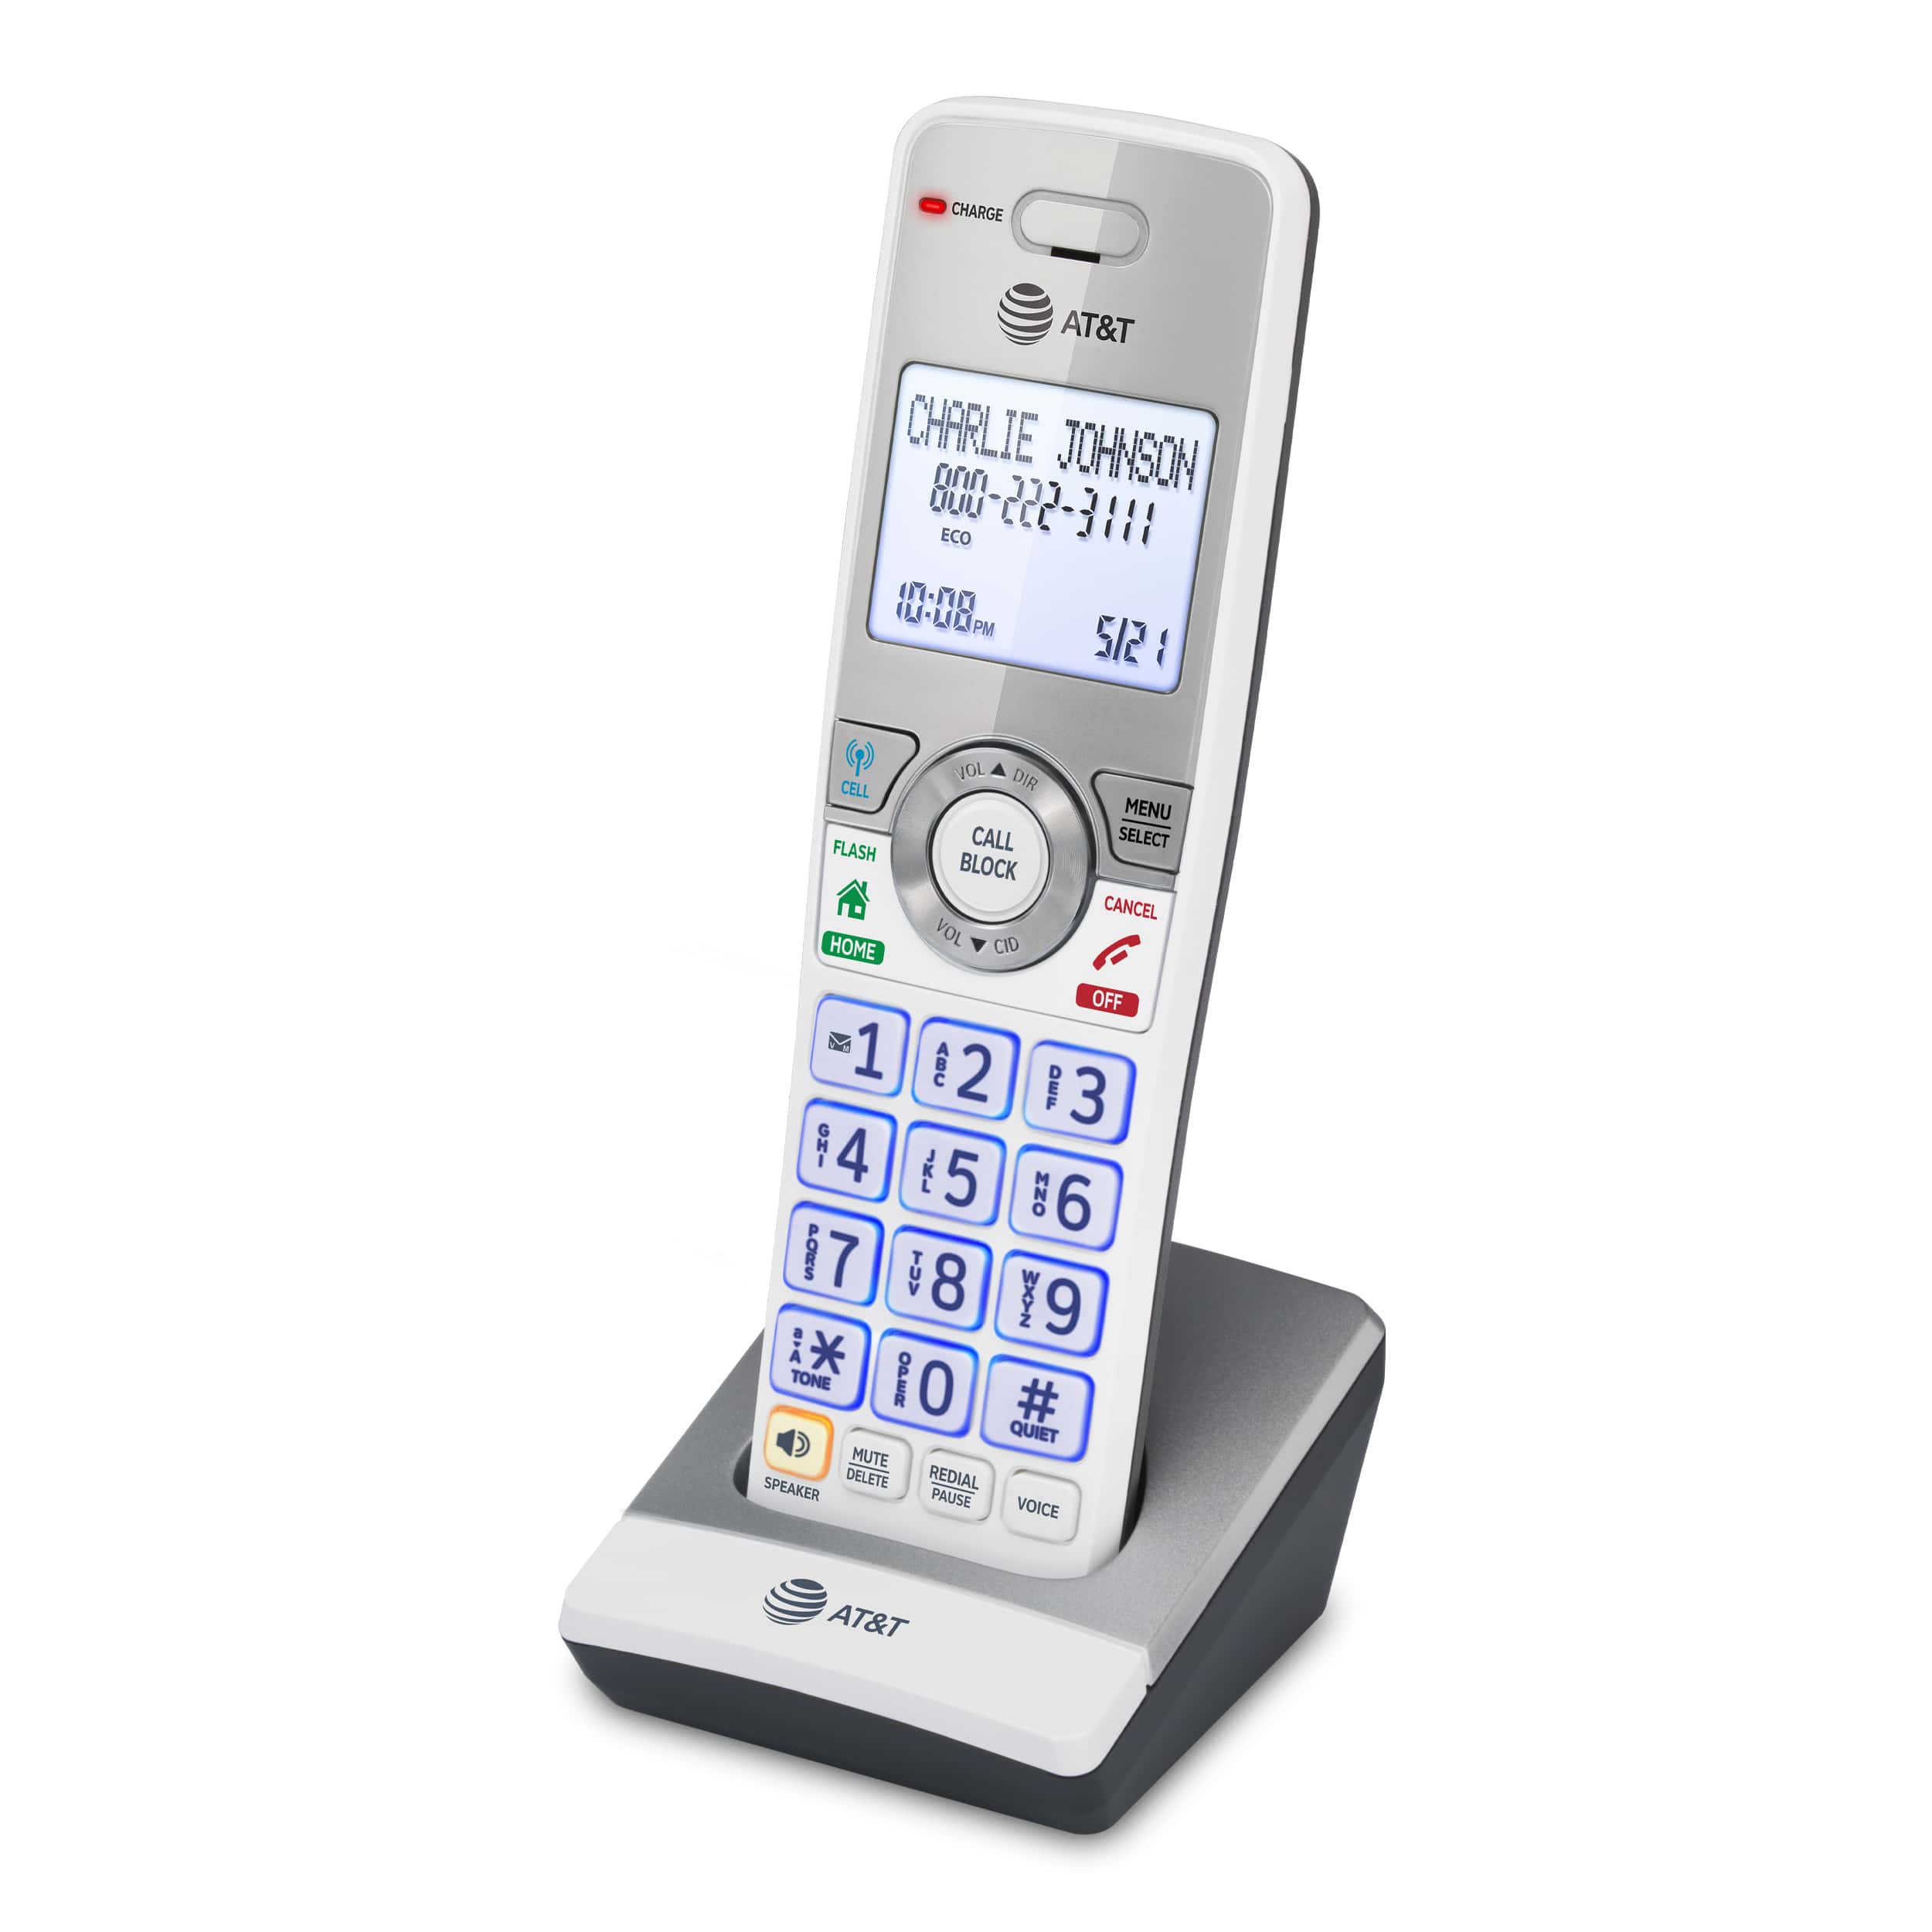 Accessory Handset with Unsurpassed Range, Bluetooth Connect to Cell, and Smart Call Blocker - view 3